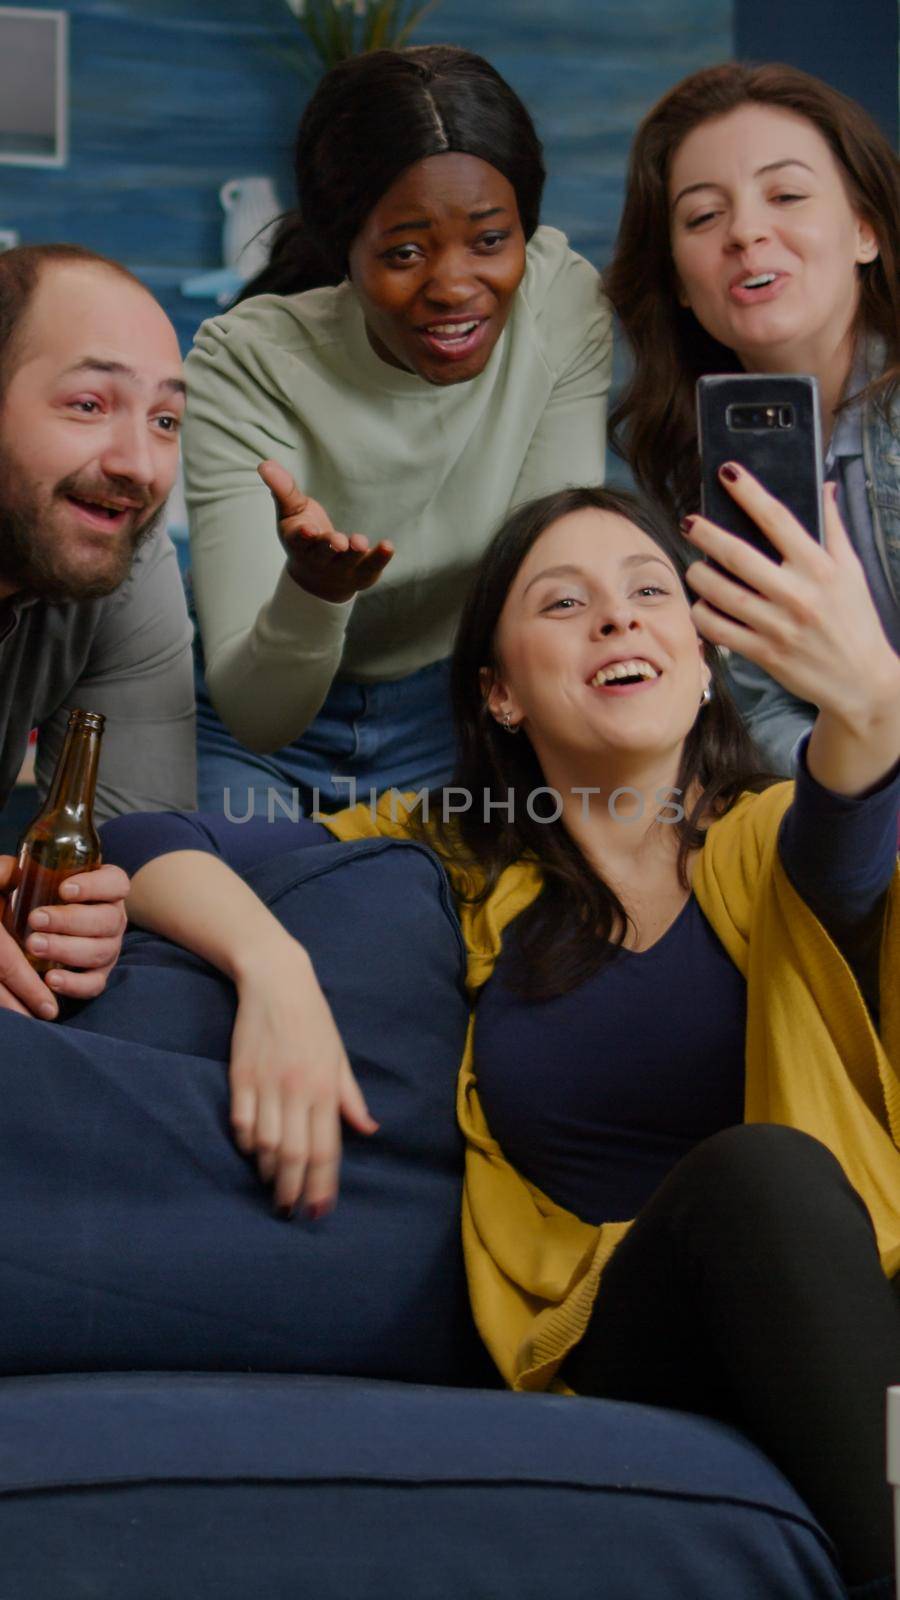 Multiracial friends speaking with collegue man during video call conference using modern smartphone. Group of multi-ethnic people hanging out together, drinking beer, having fun during night party